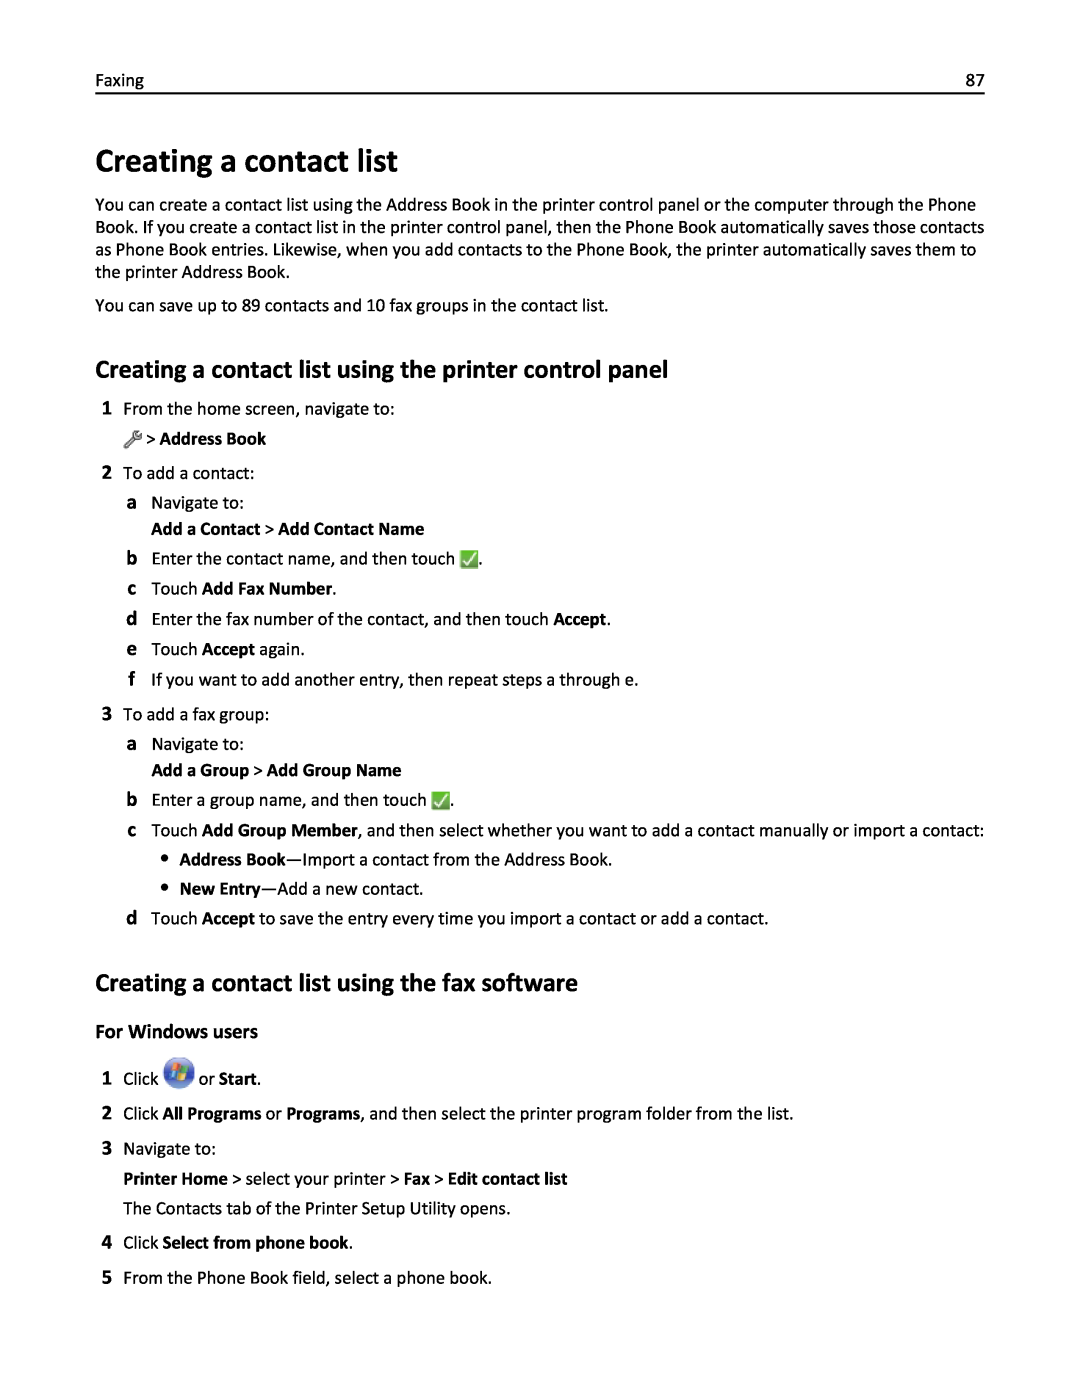 Lexmark 200, 20E manual Creating a contact list using the fax software, Add a Contact > Add Contact Name 